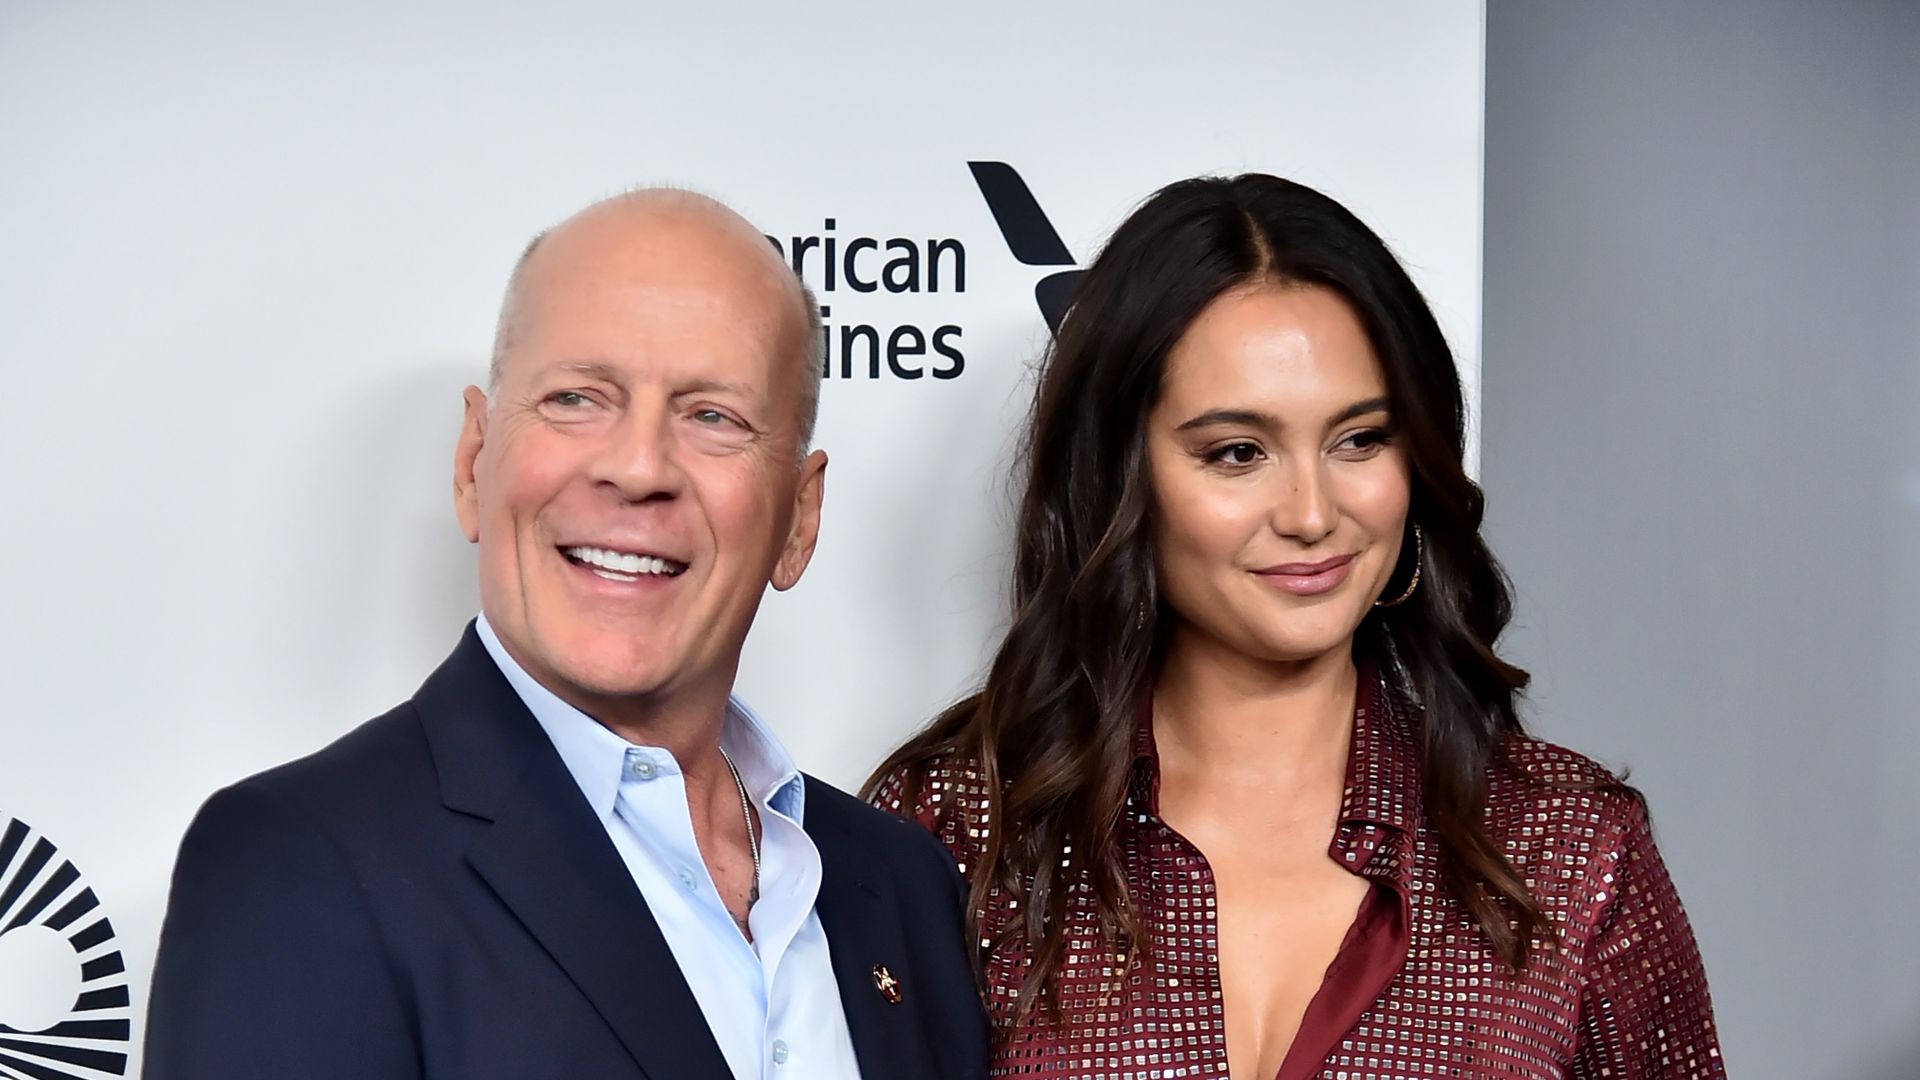 Bruce Willis and wife Emma Heming Willis attend the "Motherless Brooklyn" Arrivals during the 57th New York Film Festival on October 11, 2019